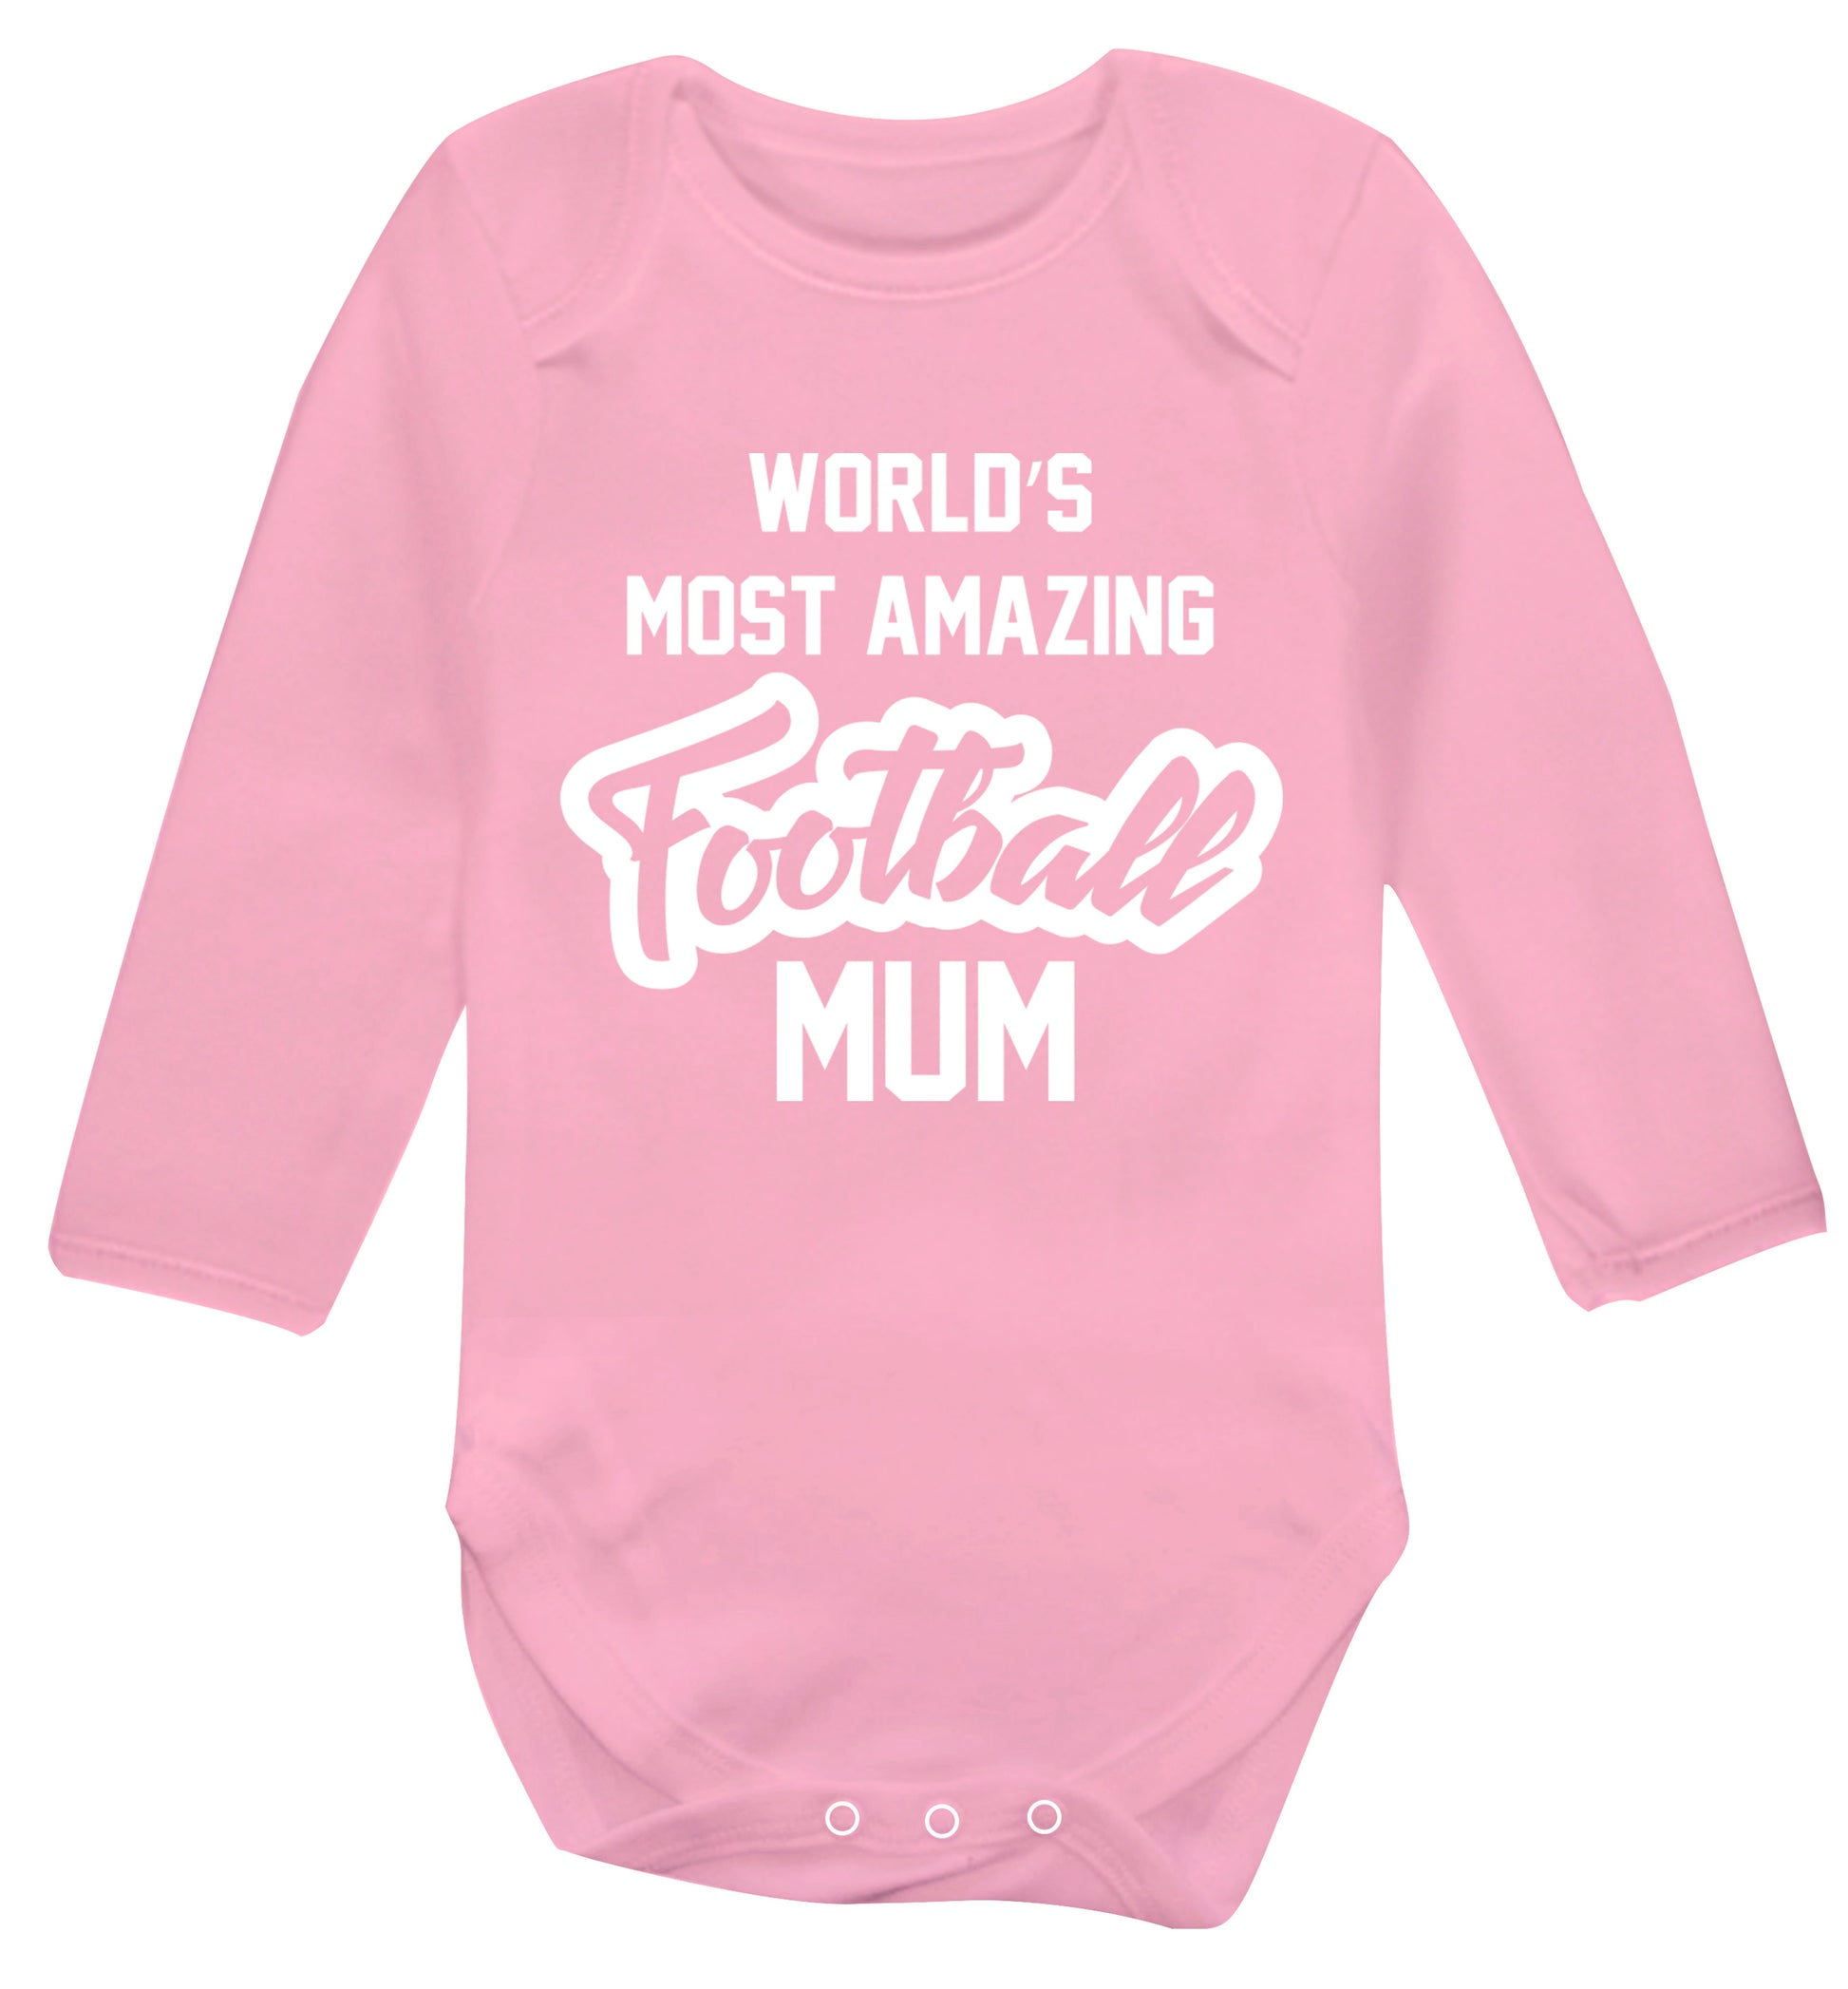 Worlds most amazing football mum Baby Vest long sleeved pale pink 6-12 months